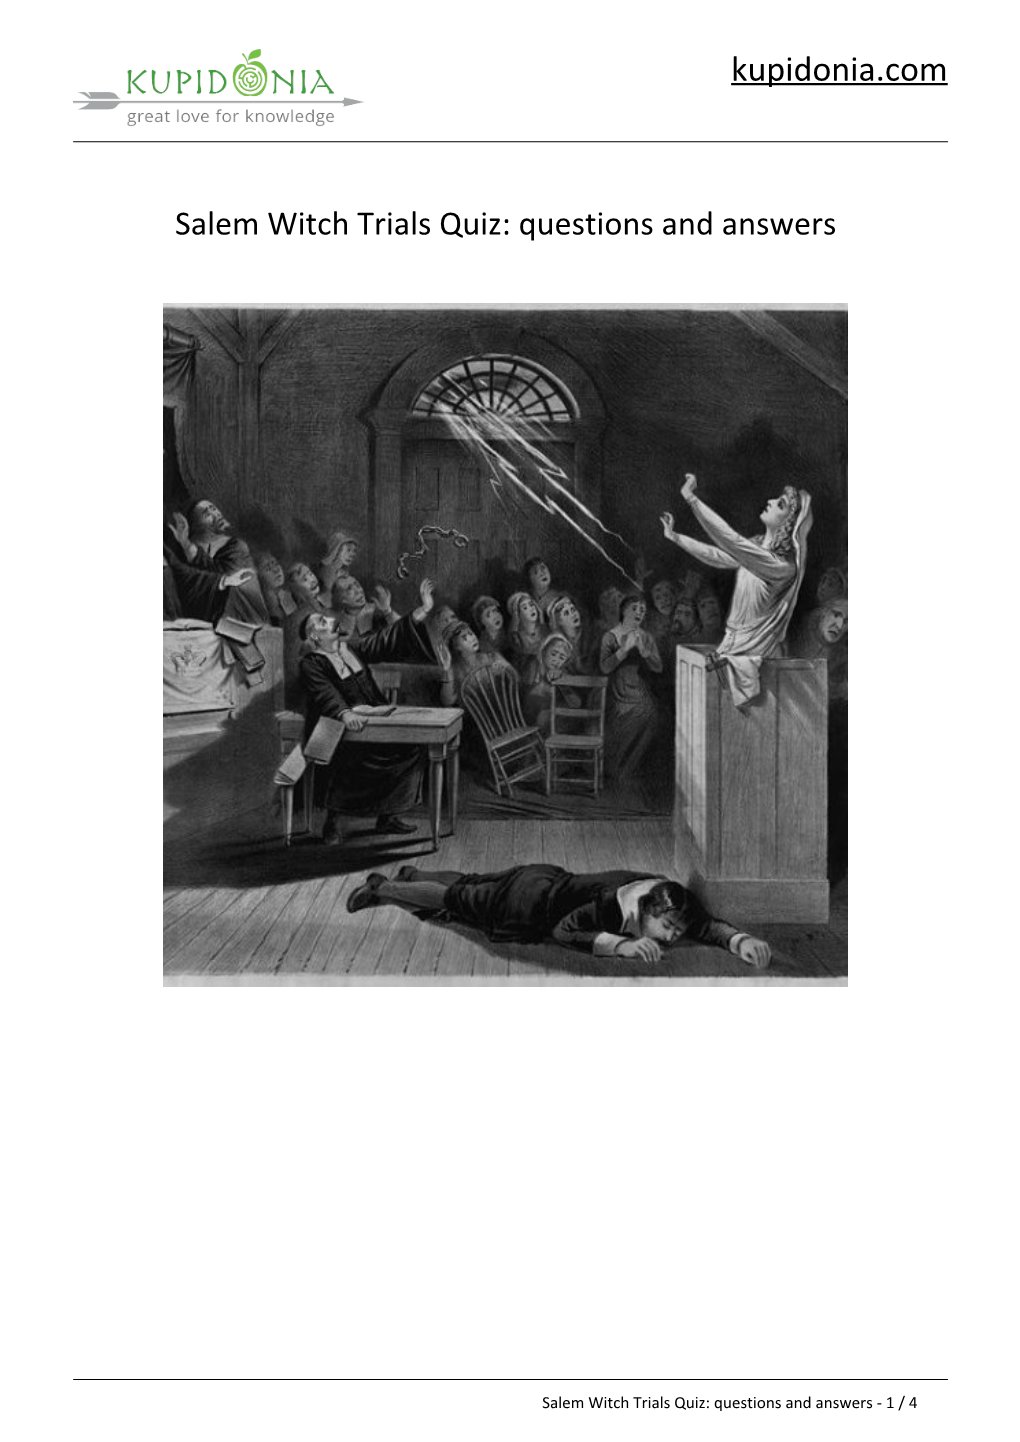 Salem Witch Trials Quiz: Questions and Answers